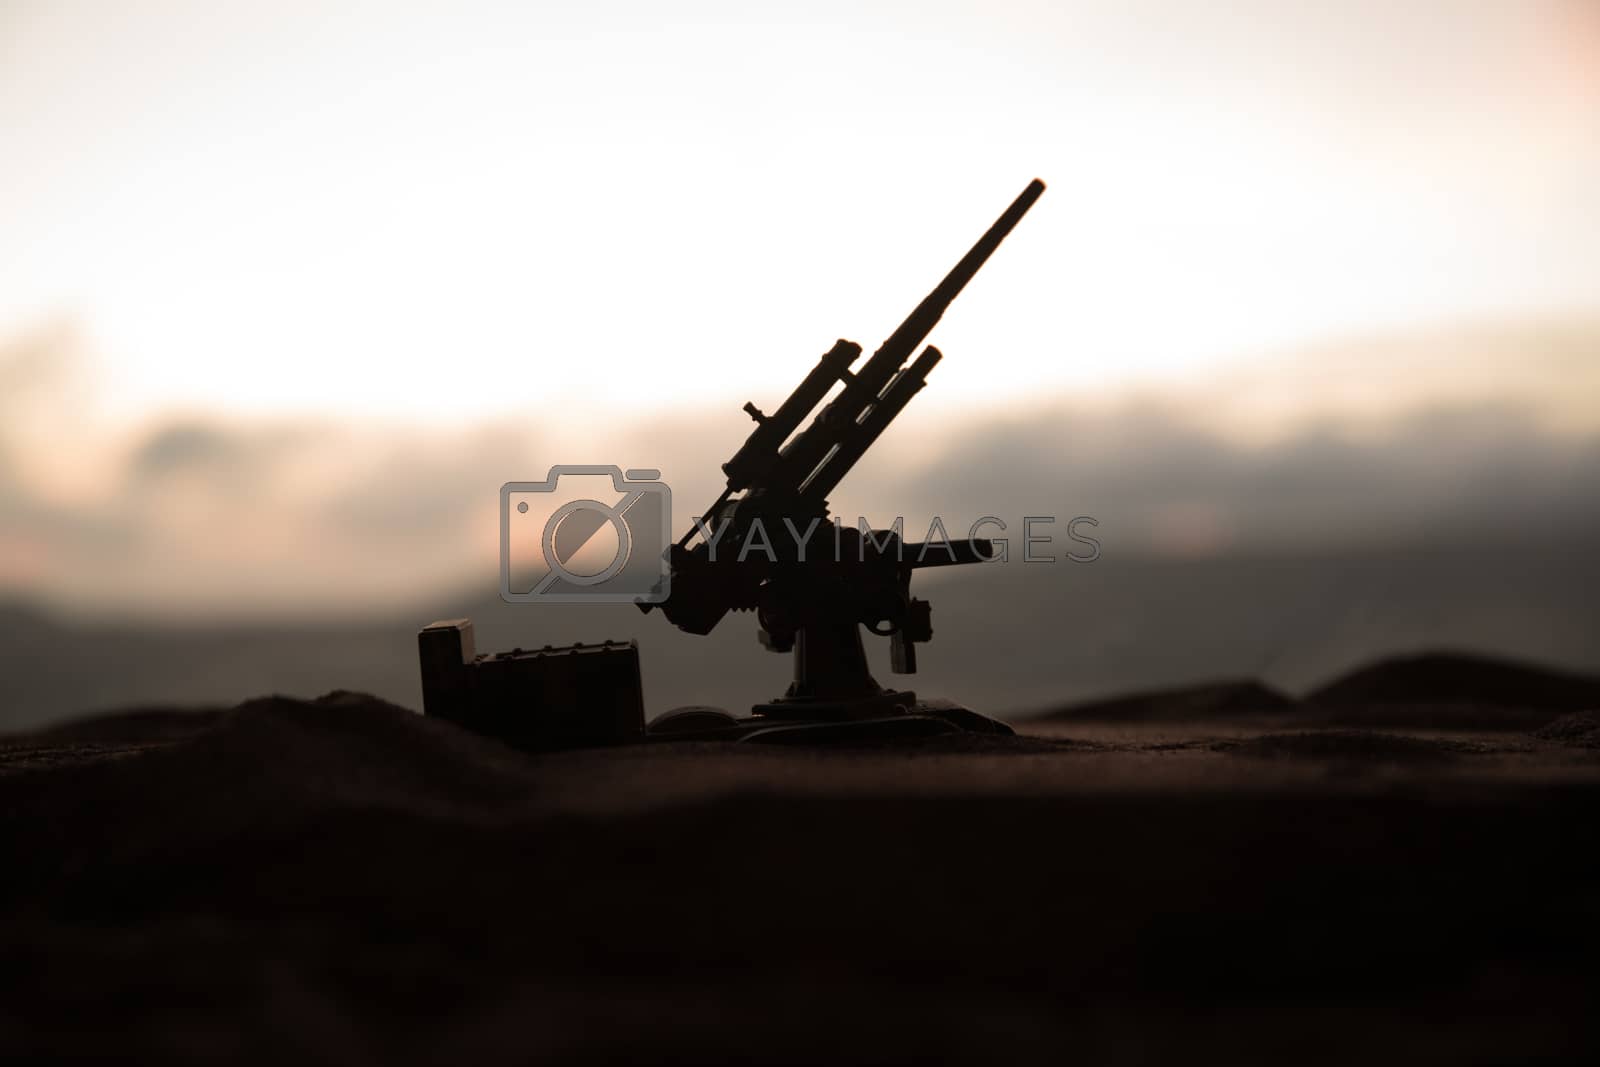 Silhouette of anti-aircraft cannon on battlefield during sunset time. Creative artwork table diorama. Selective focus. , World War Soldiers Silhouettes Below Cloudy Skyline at sunset.